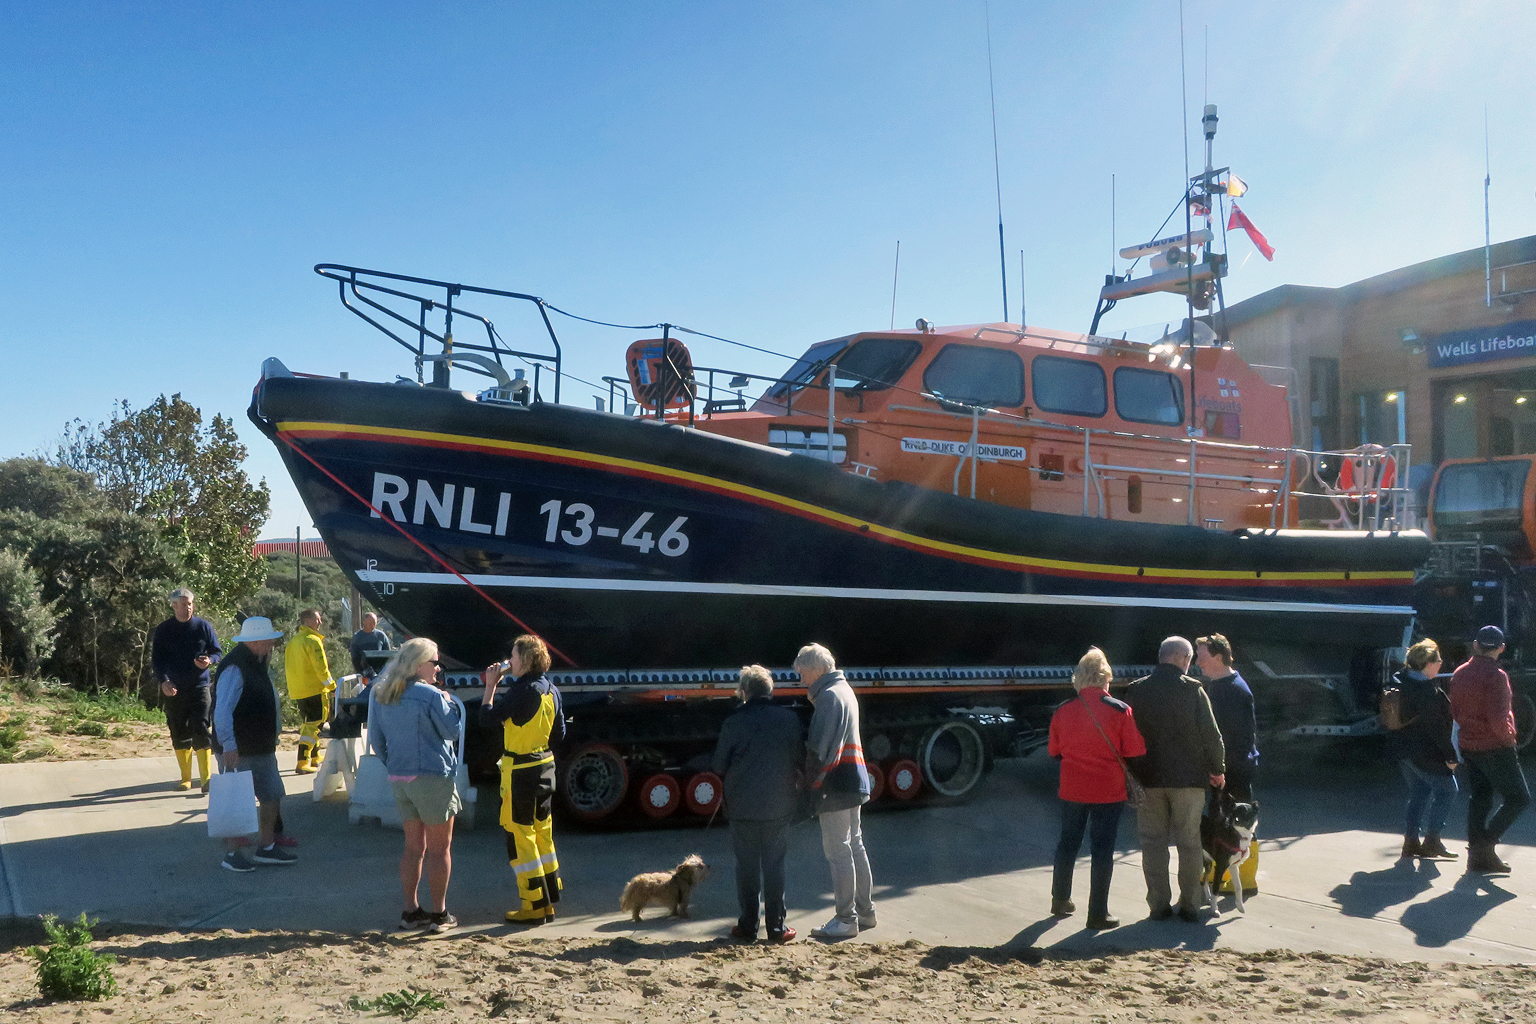 Lifeboat viewing day